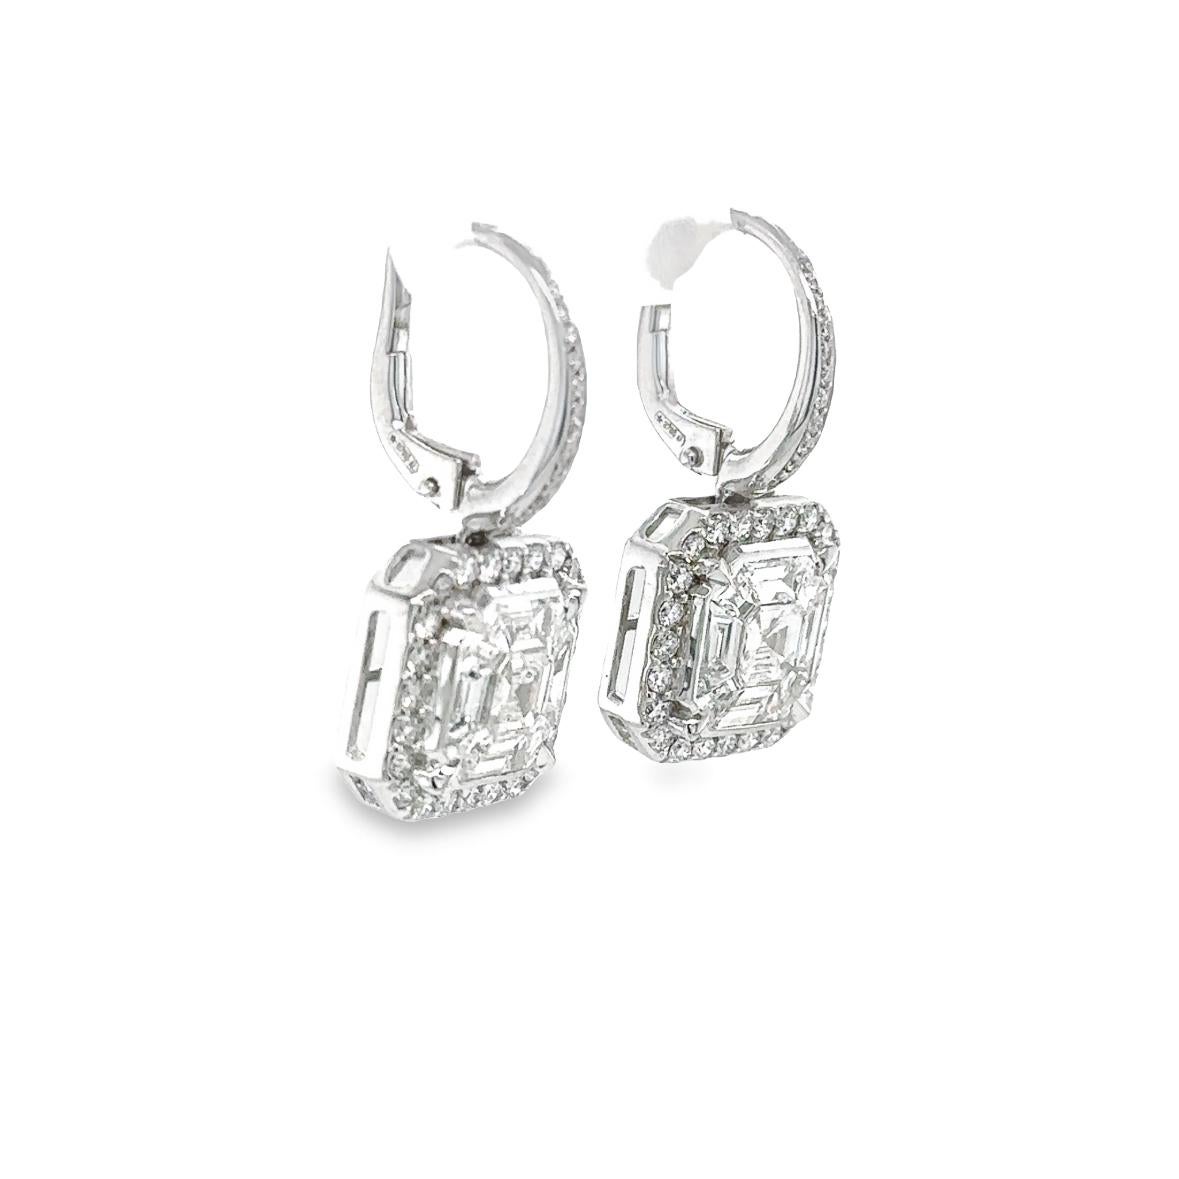 TIMELESS Earrings in white gold 18Kt 6.95 gr with Octagonal Diamonds G Color VS Clarity in total 1.72 ct and diamonds G color VS clarity in total 0.63 ct.

Timeless Collection inspired by elegance and its endless style. The sophistication and